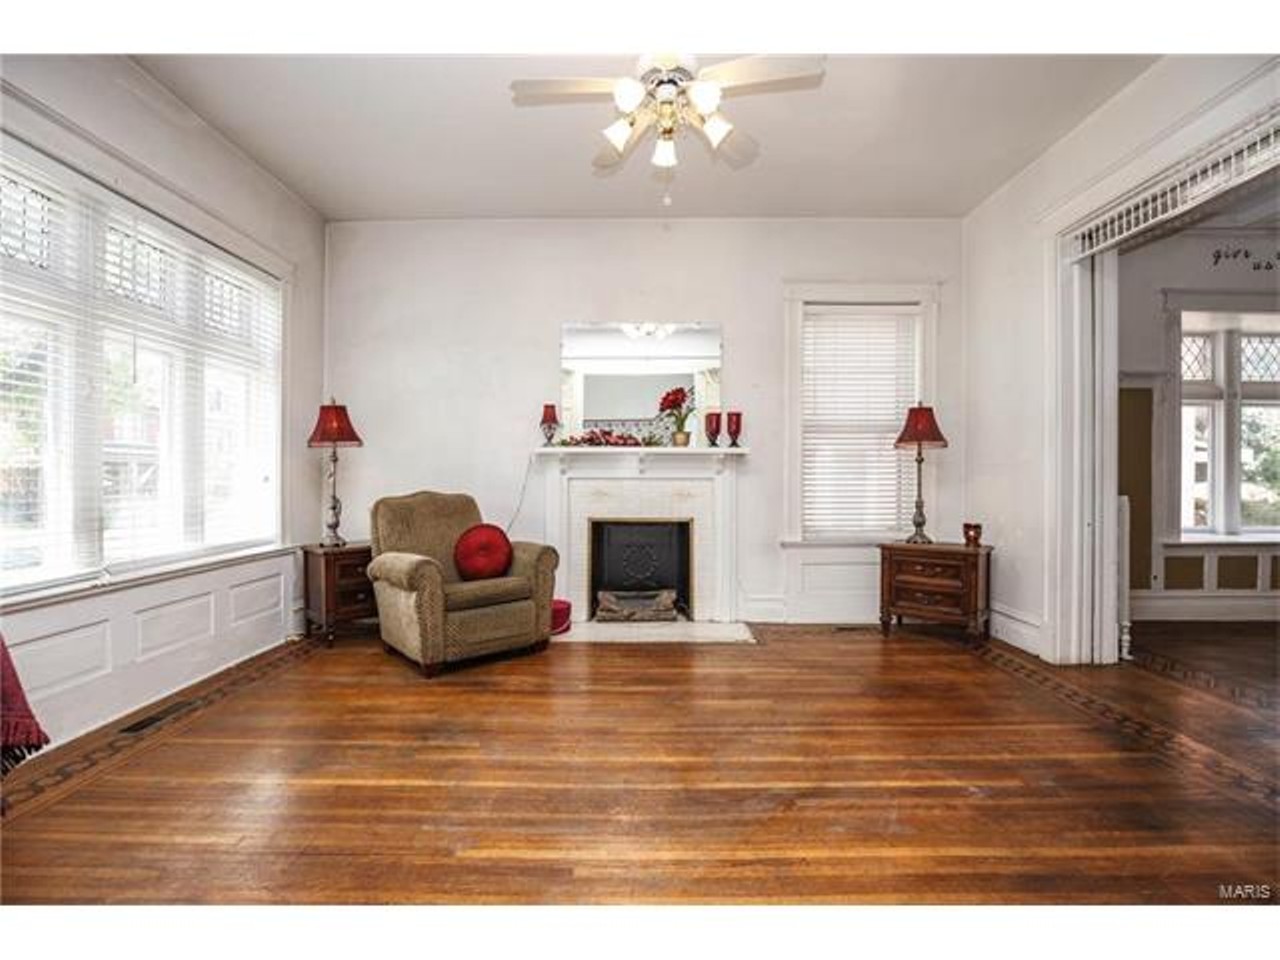 3939 Russell
St Louis, MO 63110
5 beds, 3 baths
$190,000
Located in Shaw, this home is the definition of "curb appeal." Here you'll find details like new wiring, a newer roof, numerous window seats, stained glass and inlaid hardwood floors. Oh, and did we mention that this house is less than a mile away from the Missouri Botanical Gardens?